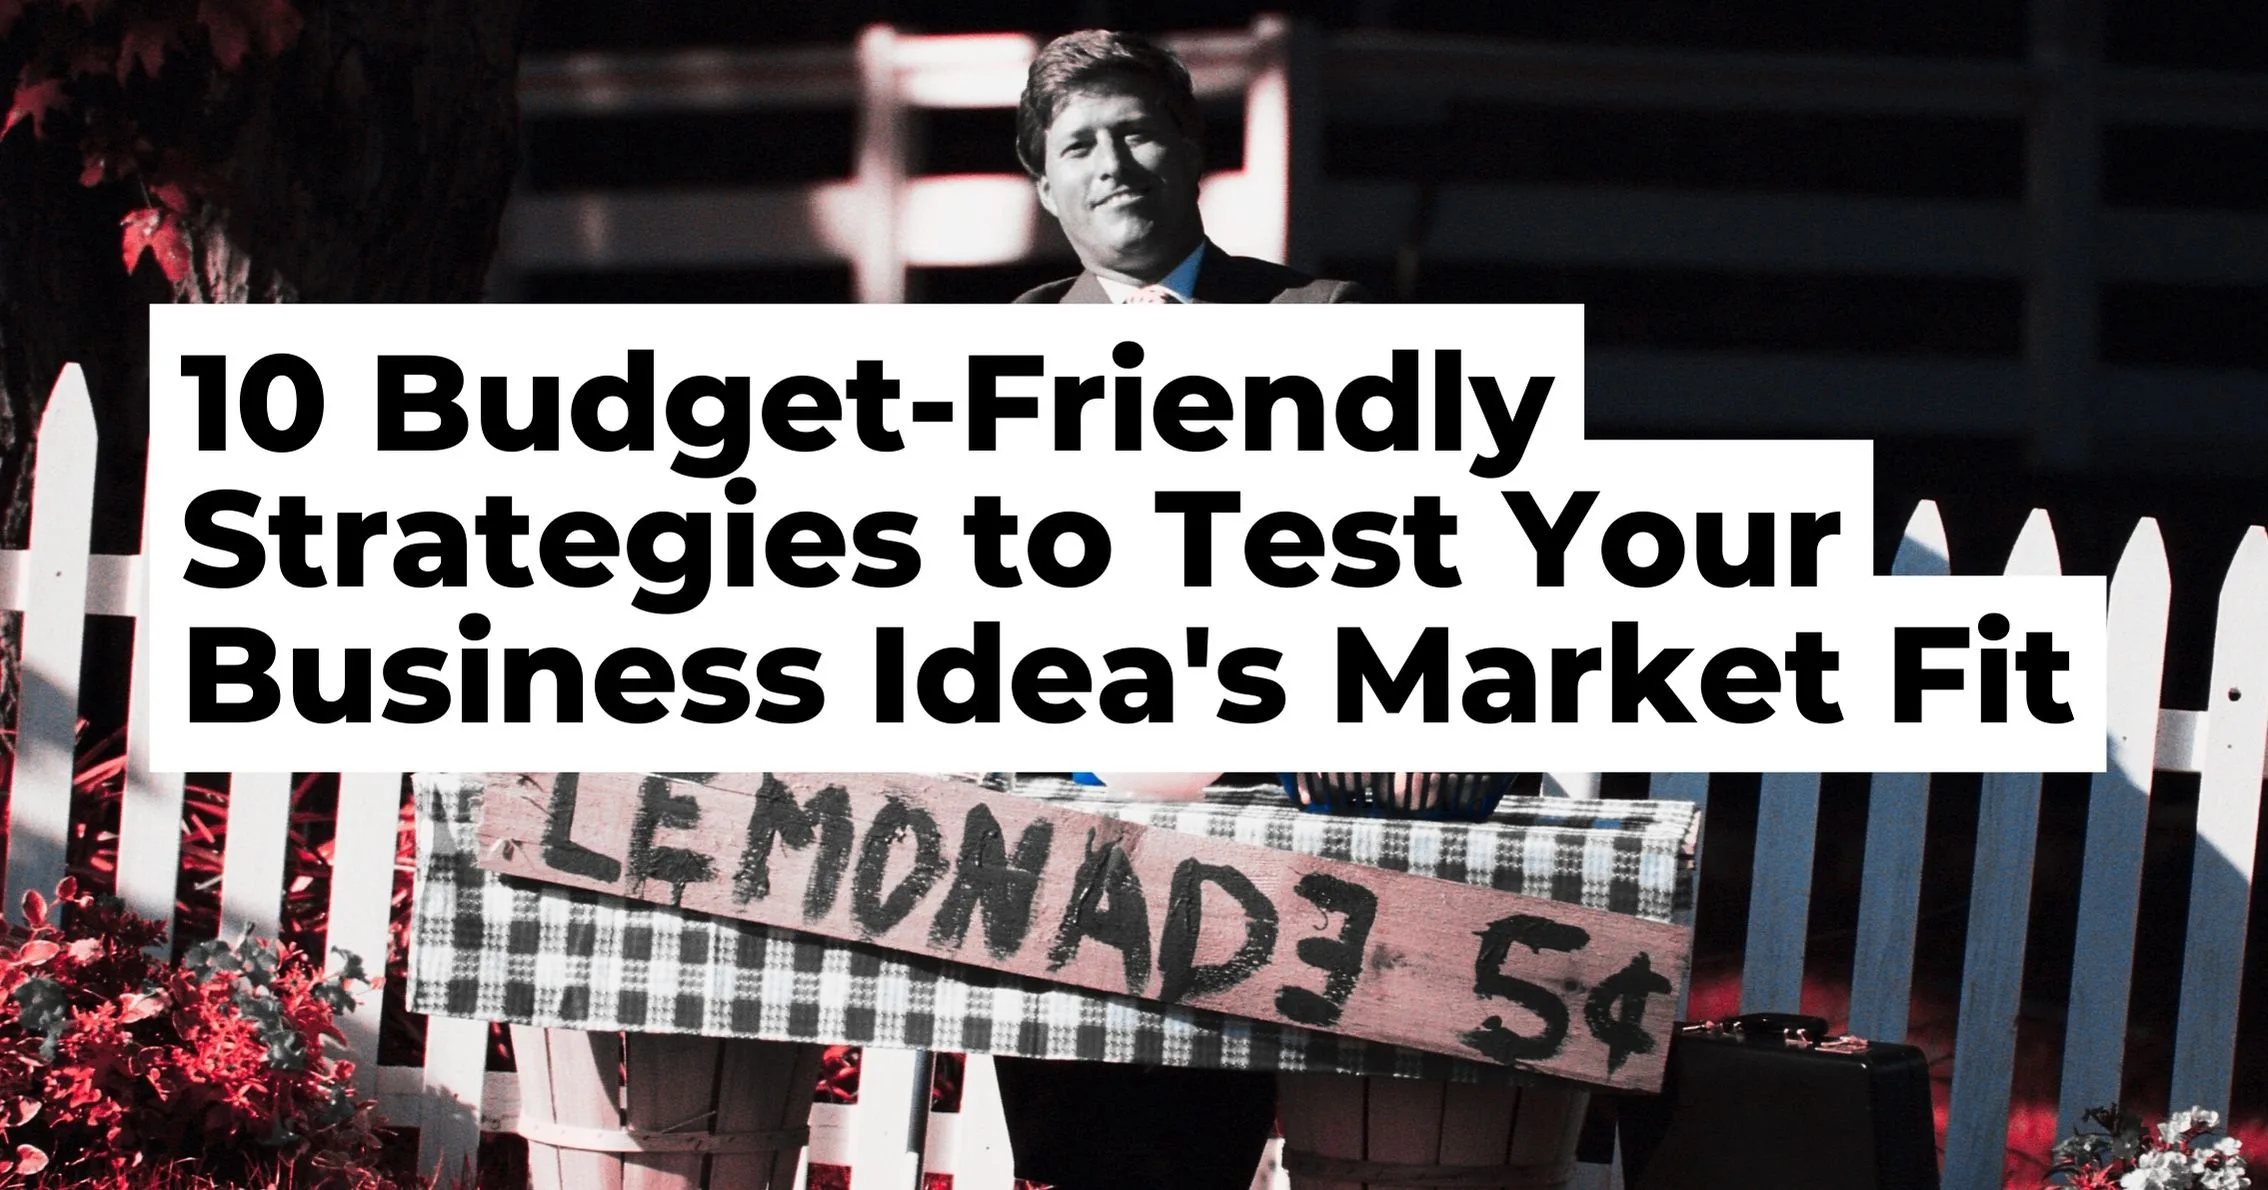 10 Budget-Friendly Strategies to Test Your Business Idea’s Market Fit